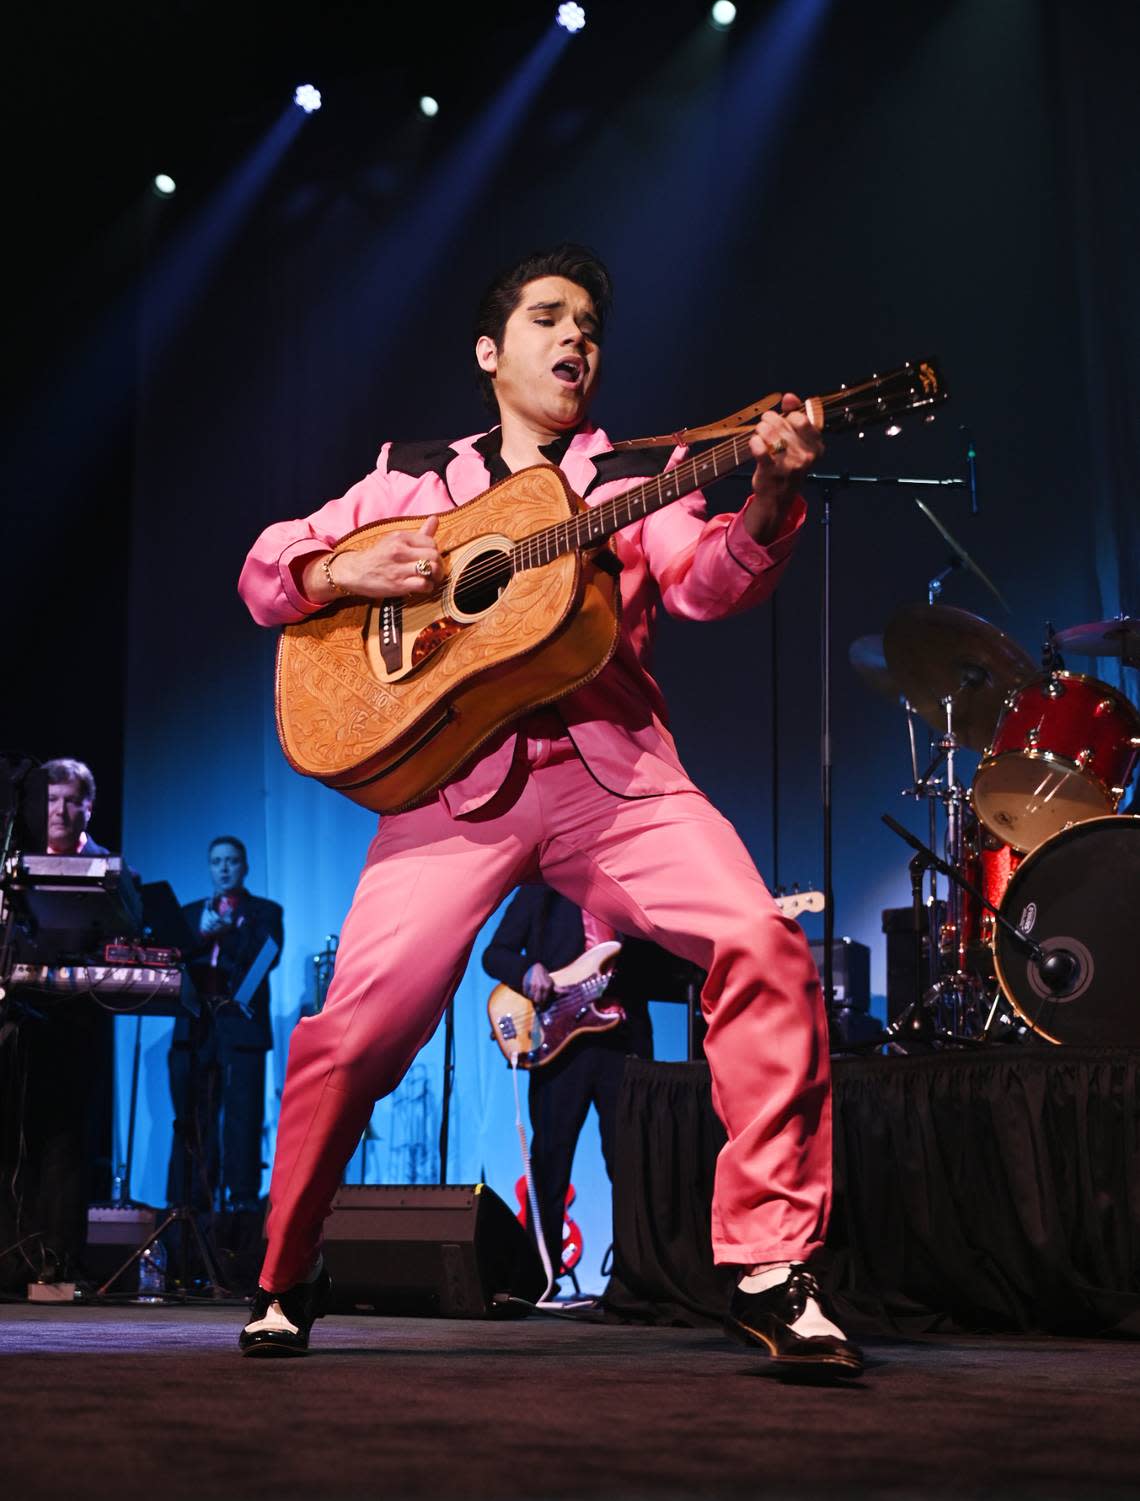 Victor Trevino Jr. performs his Elvis Presley Tribute in a pink and black blazer.